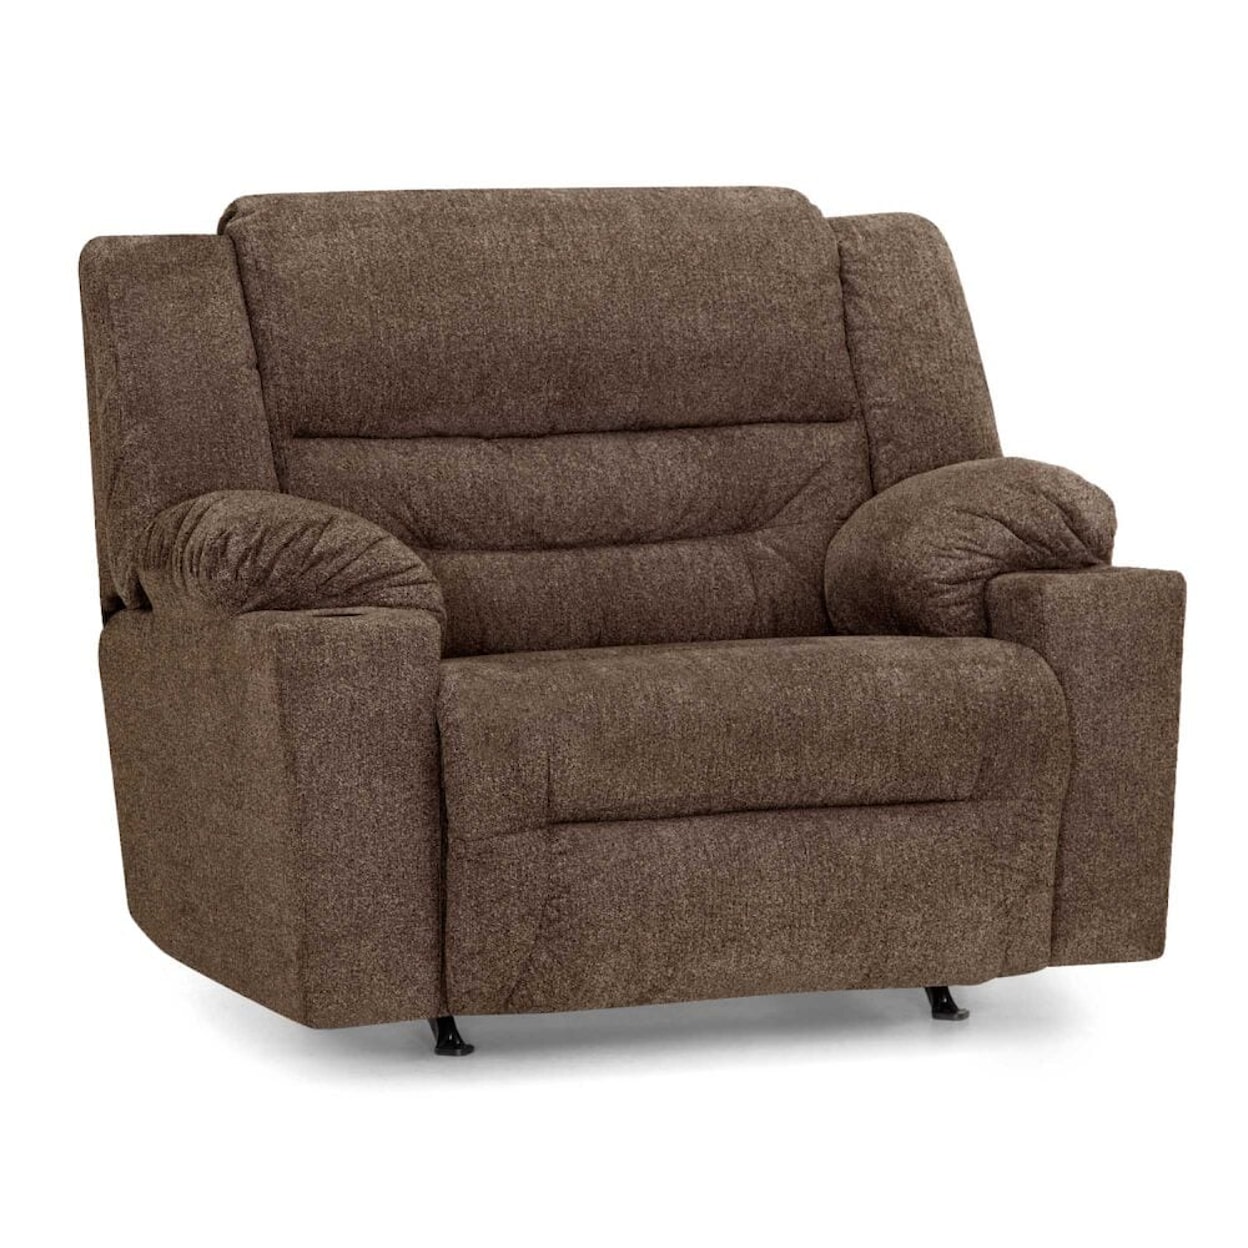 Franklin Recliners MARY BROWN ROCKING RECLINER |